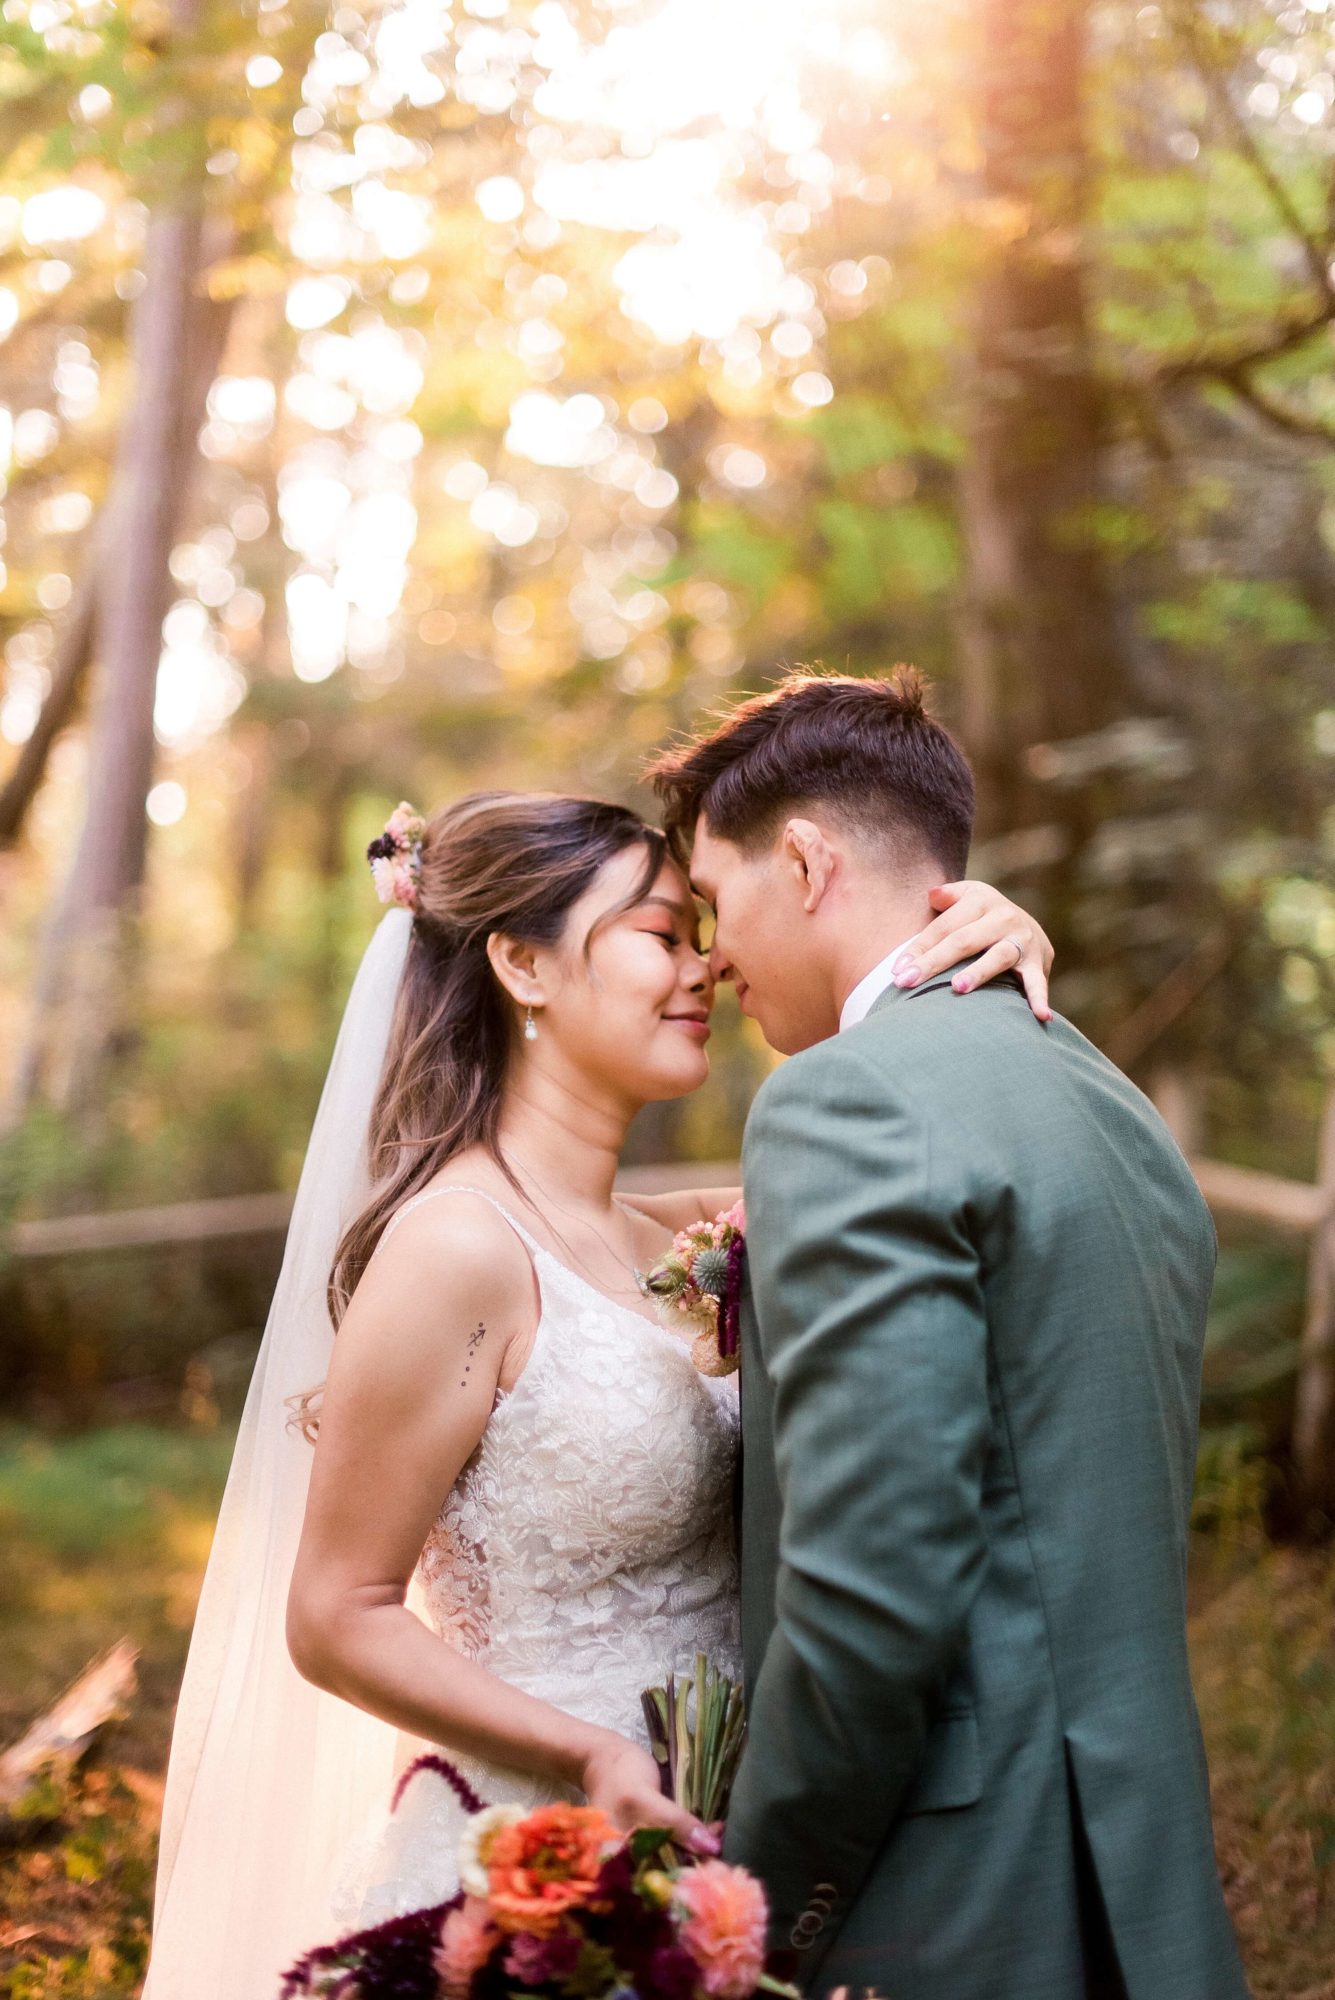 bride and groom embrace in the forest at The Lodge at St. Edwards wedding venue